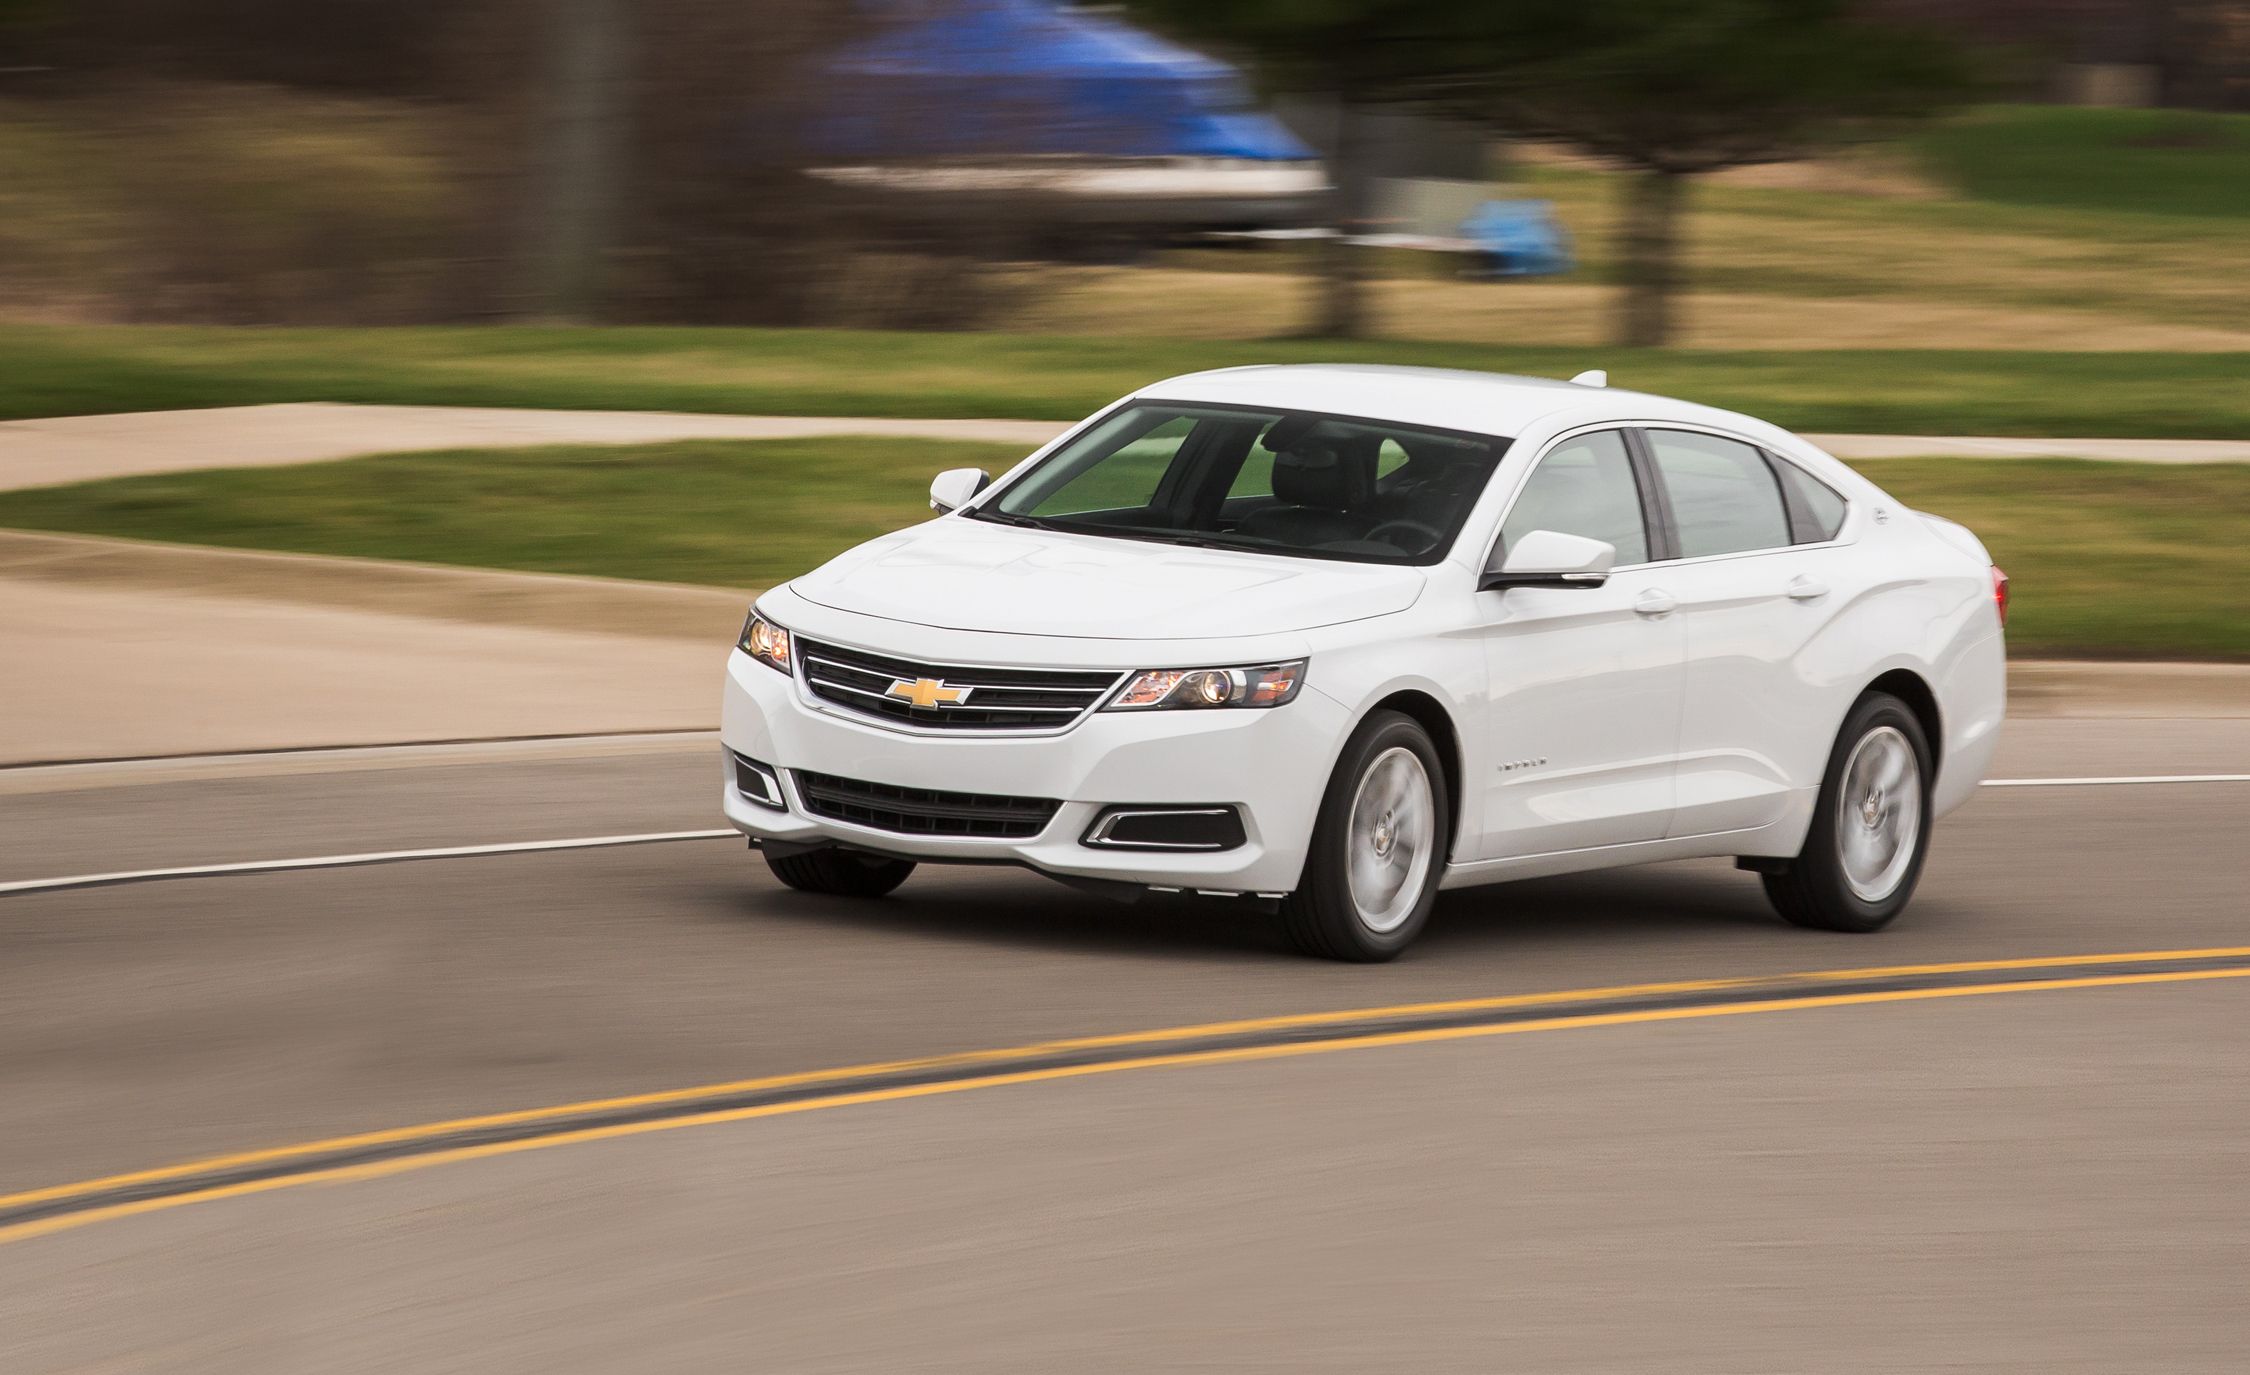 2017 Chevrolet Impala Review: Quietly Competent